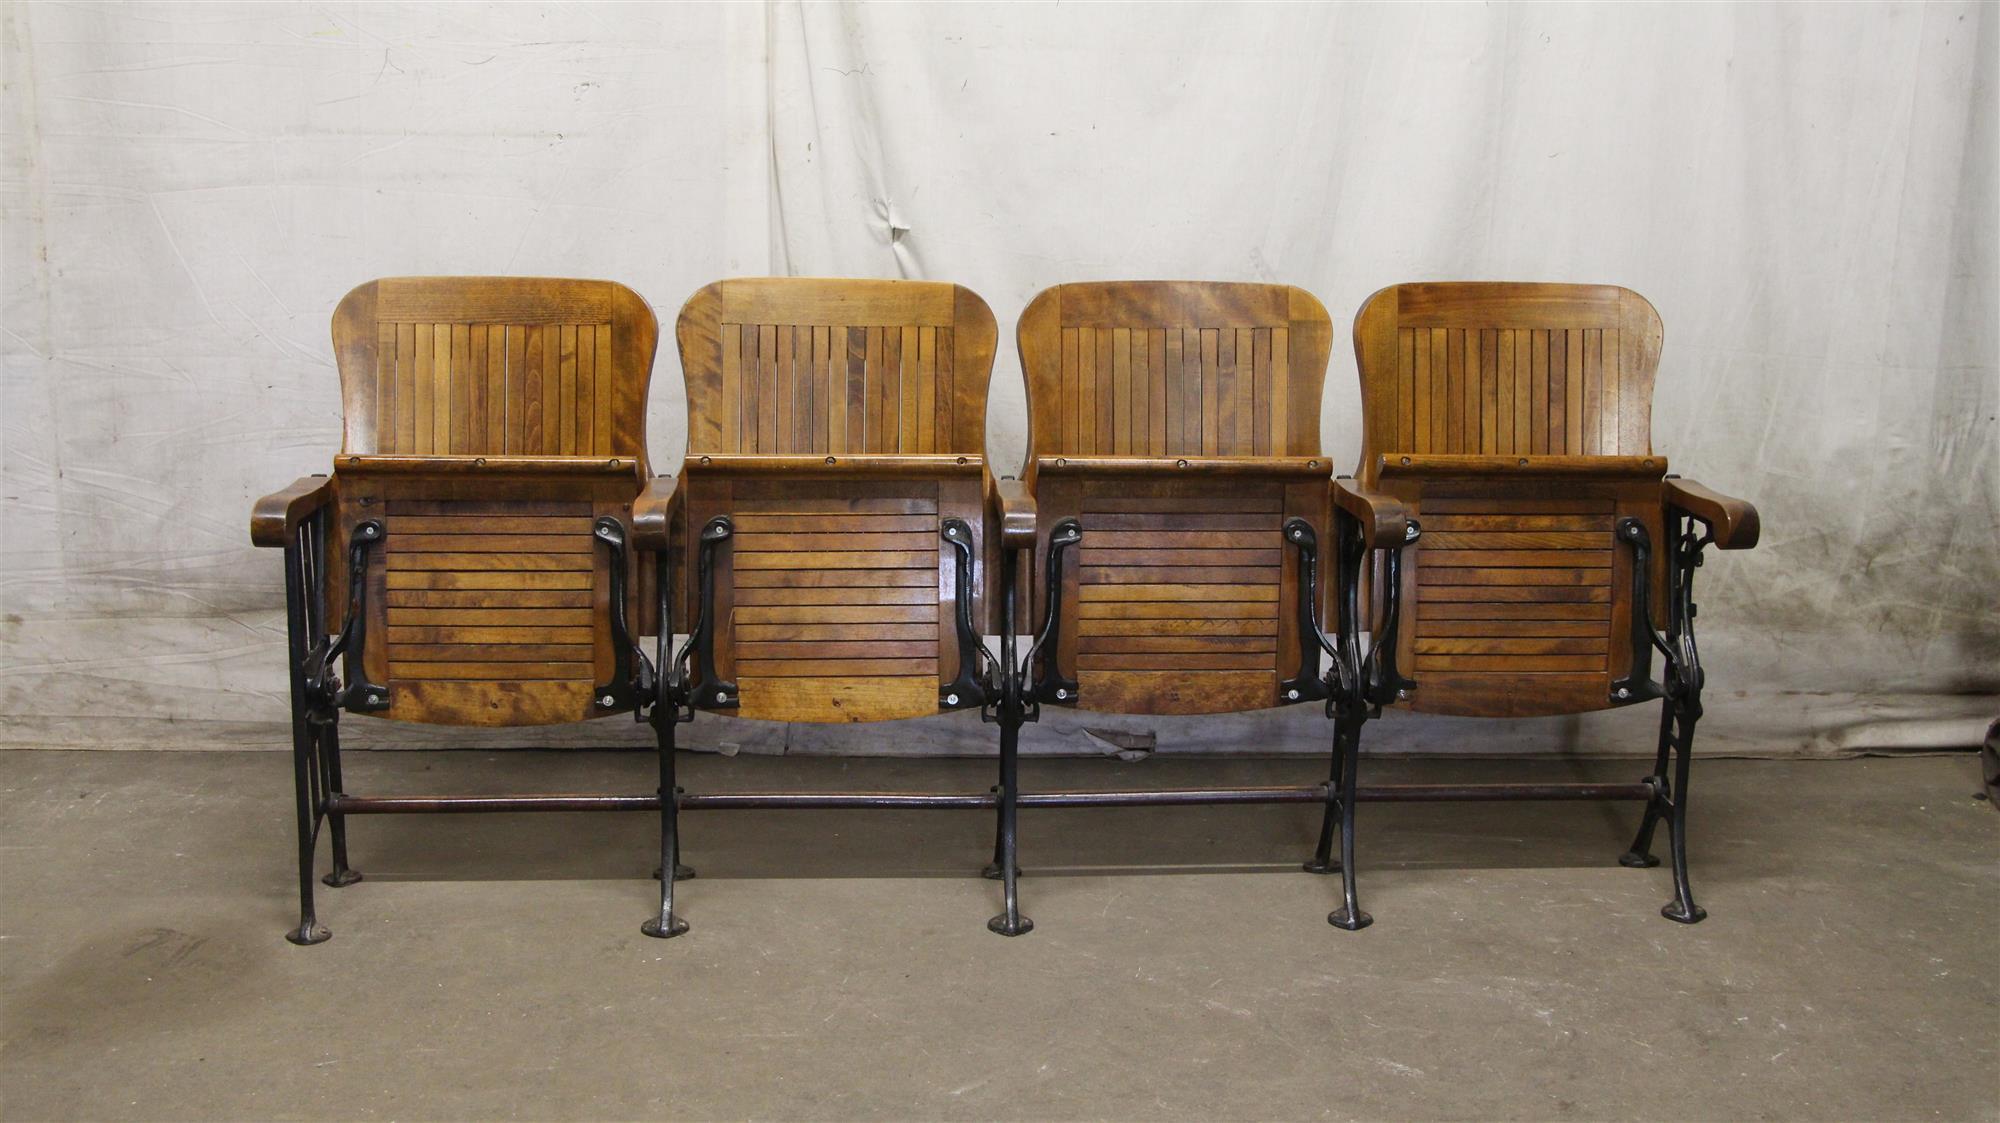 American Eric, 1905 Four Seat Folding Theater Chairs with Cast Iron Frame from Brooklyn